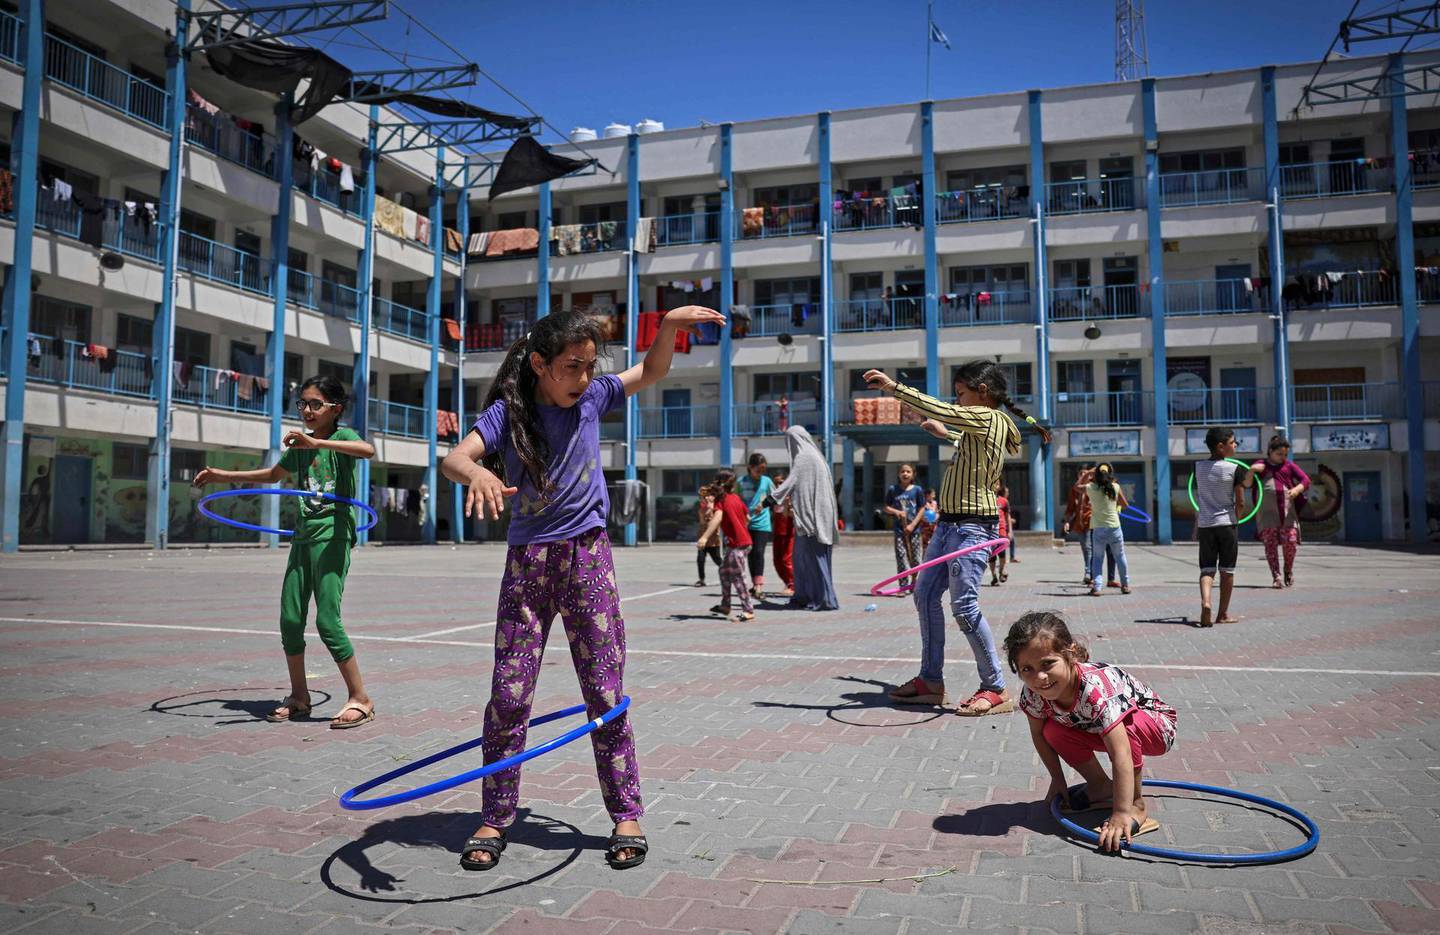 TOPSHOT - Children play at a school run by the United Nations Relief and Works Agency for Palestinian Refugees (UNRWA) where many displaced Palestinian families have sought refuge in Gaza City amid daily air strikes and bombardment by Israeli forces, on May 19, 2021. UNRWA spokesman Adnan Abou Hasna told AFP its schools that have been transformed into shelters for more than 40,000 displaced Gazans could become new coronavirus "epicentres." He said the agency had set up hand-washing stations and other sanitary facilities but conceded these measures were inadequate given the conditions.
 / AFP / MAHMUD HAMS
